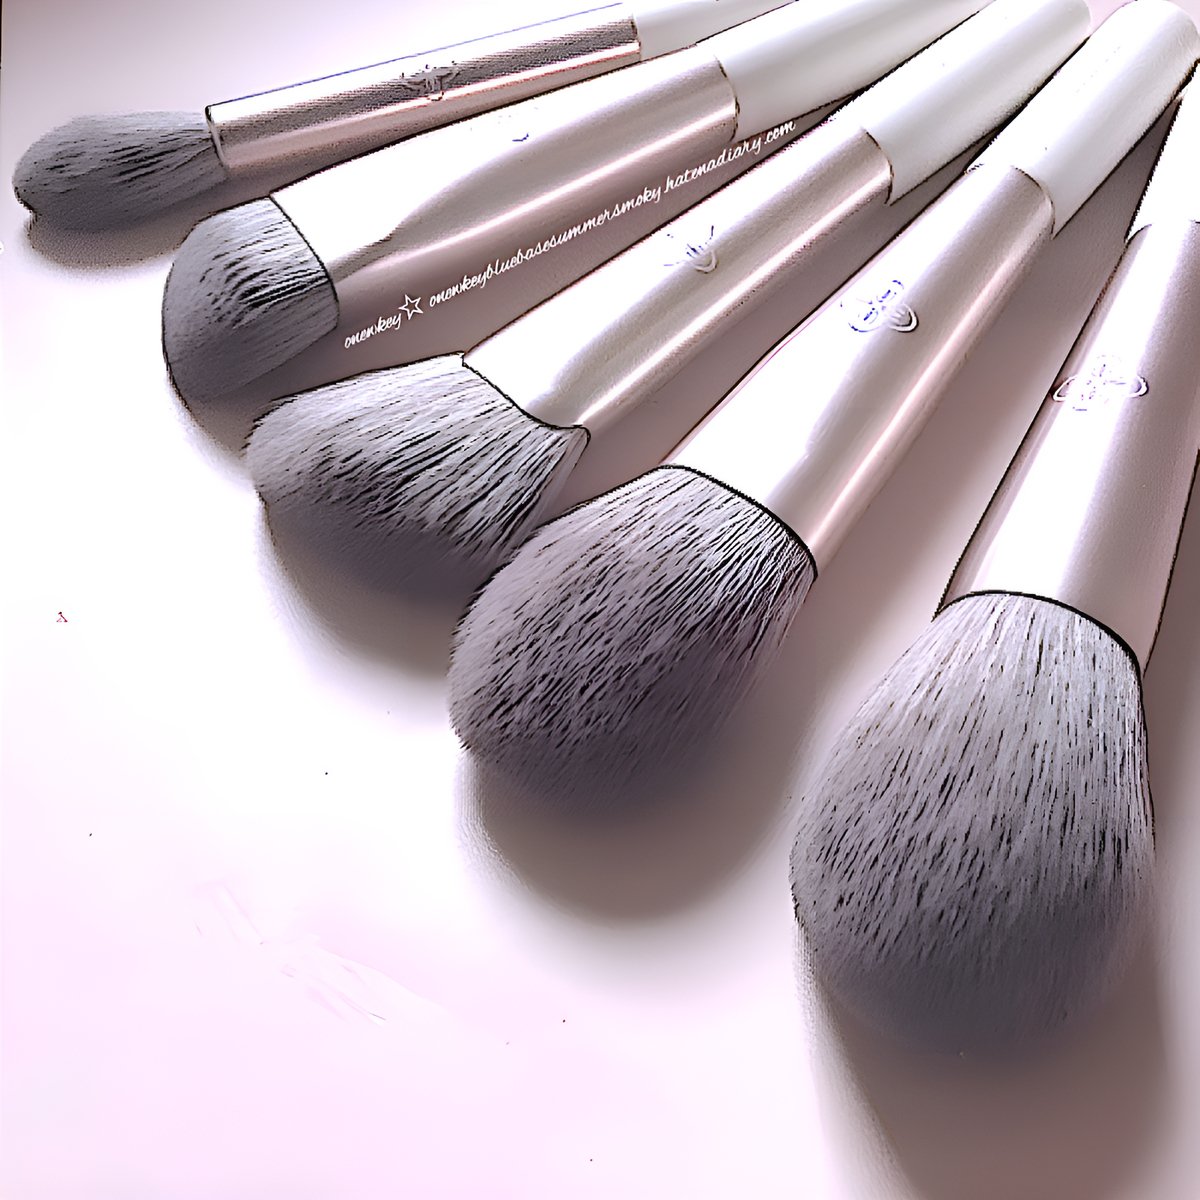 ・Product Link（⚡️Use My Code:ONEWKEY）
bit.ly/3PJhLny
・Review
bit.ly/468nUyE
#MakeupBrushes #メイクブラシ